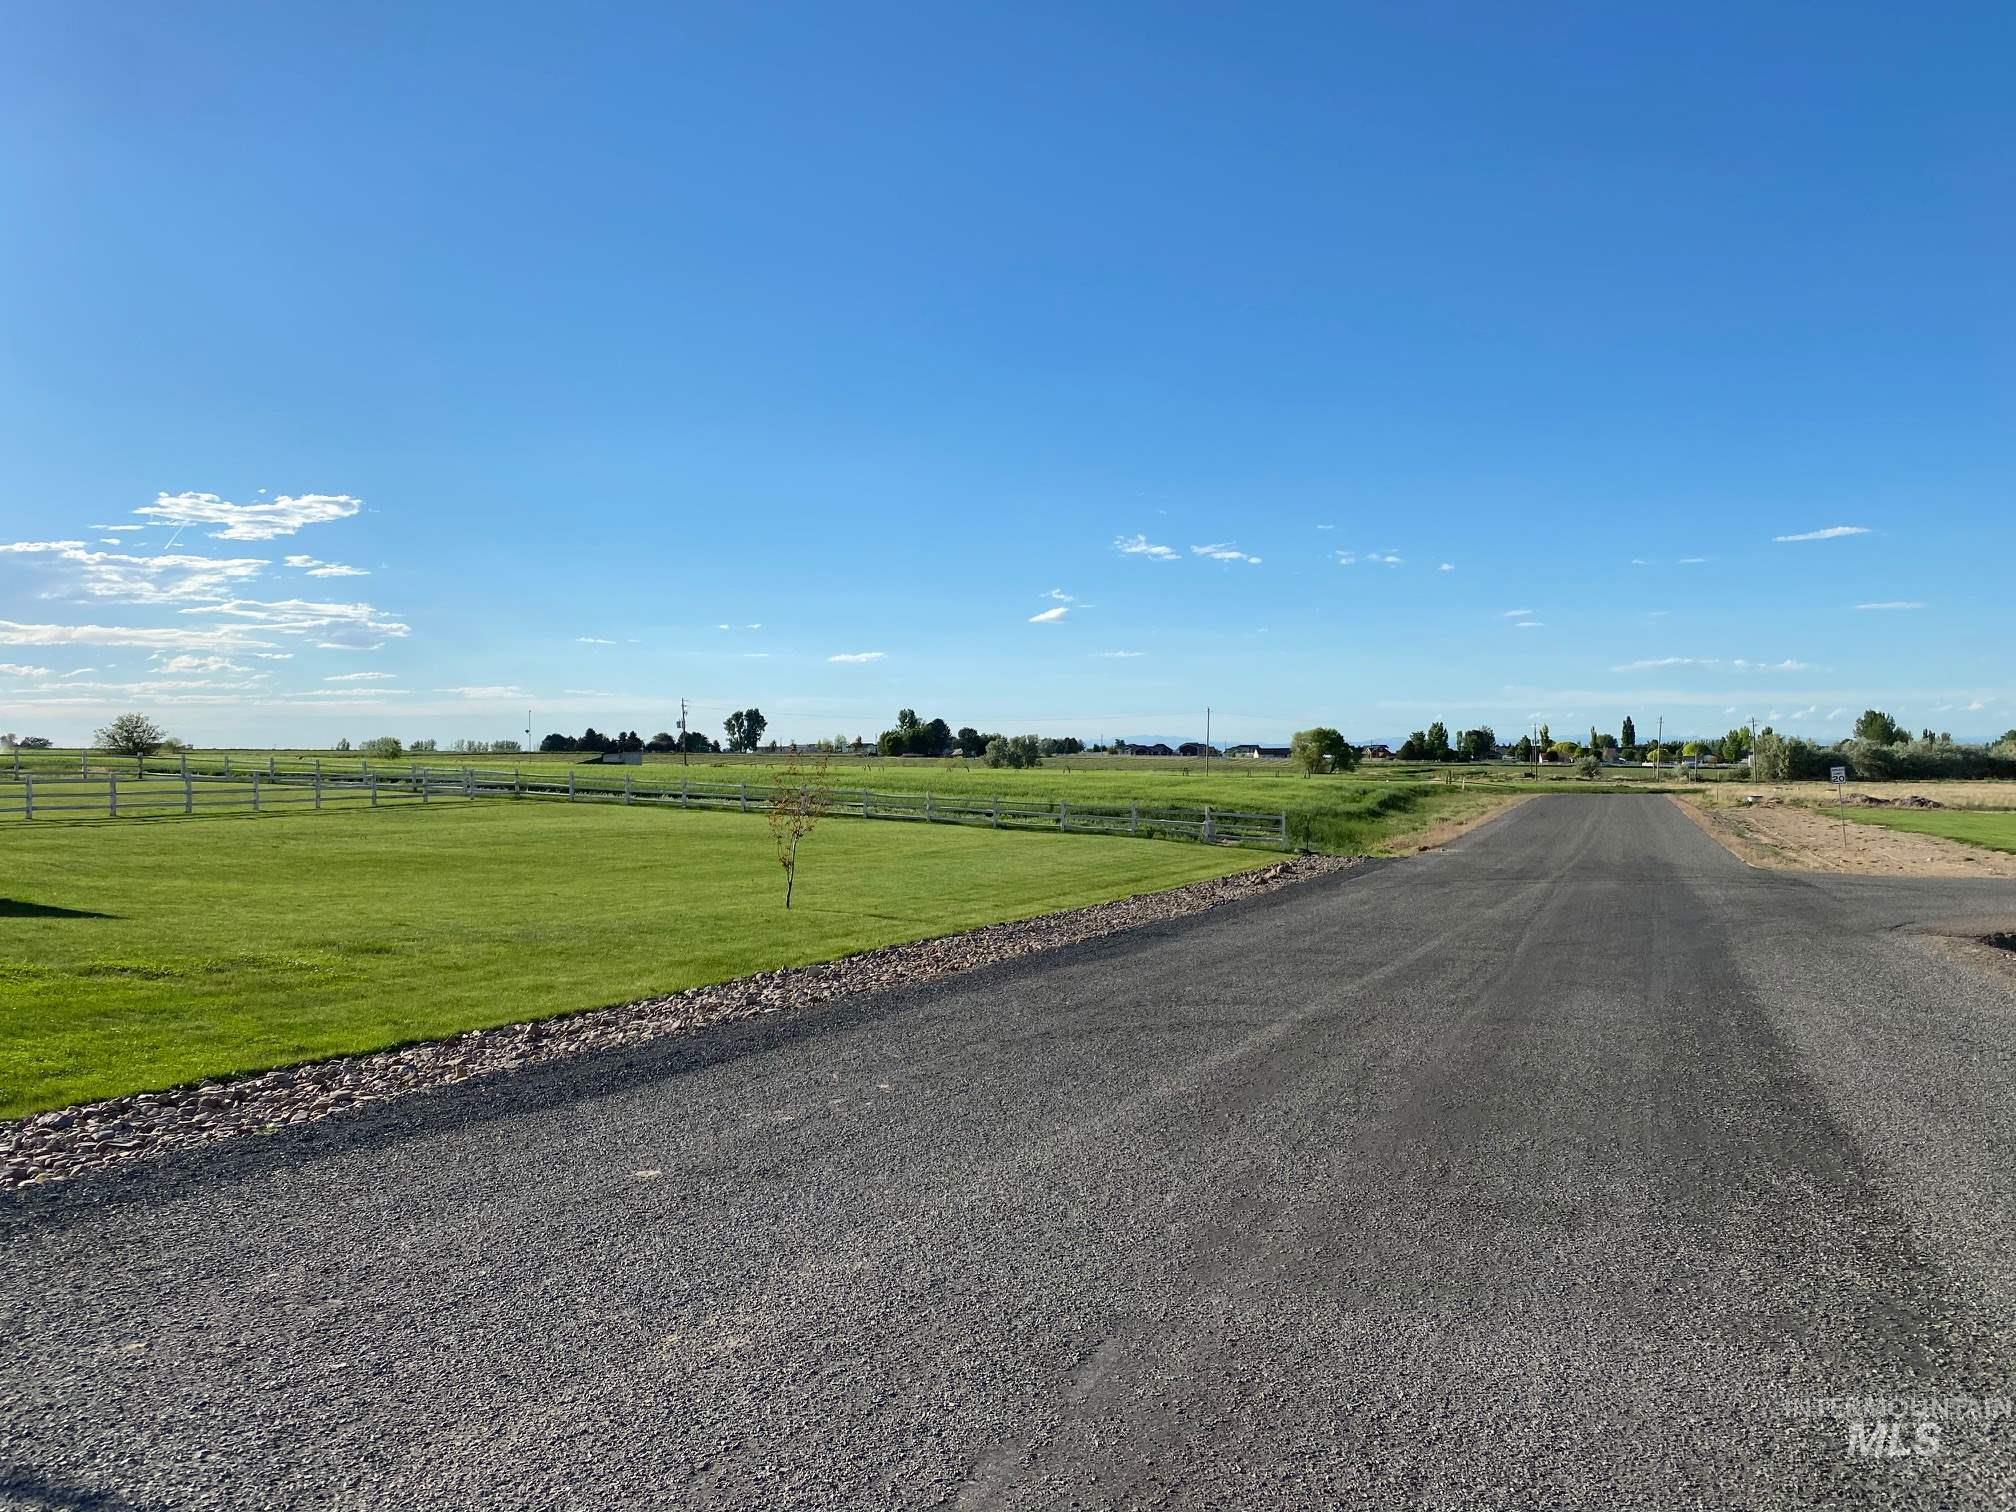 3730 N 2469 E Seabiscuit Drive, Twin Falls, Idaho 83301, Land For Sale, Price $135,900,MLS 98891216